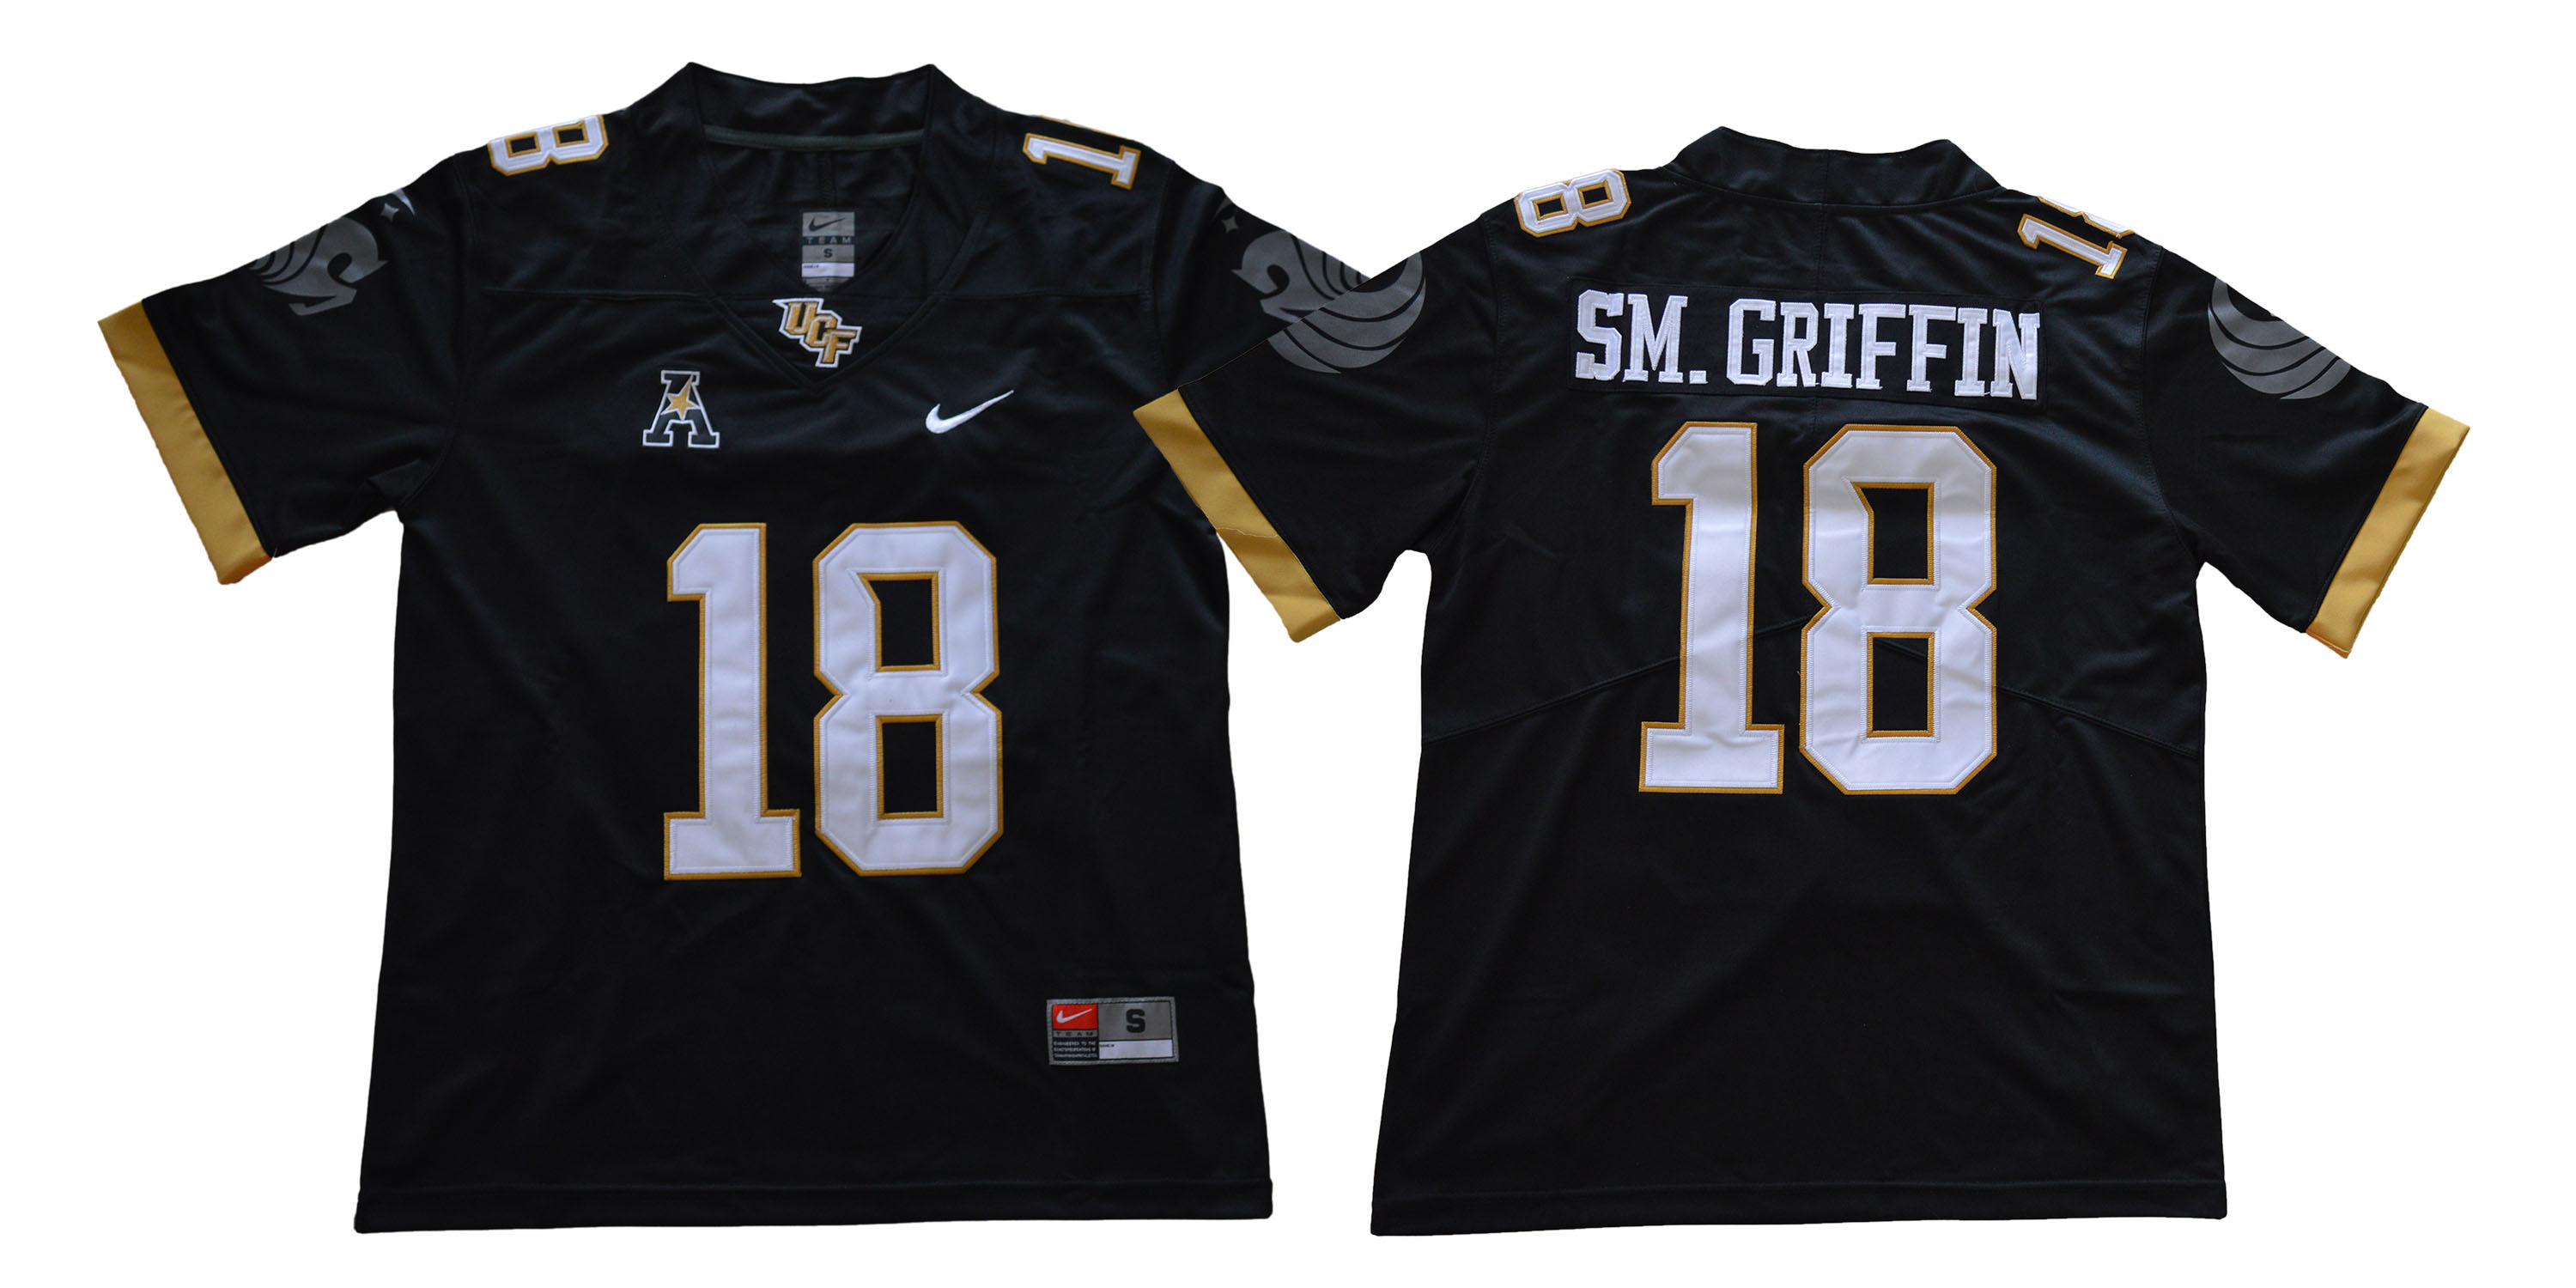 UCF Knights 18 Shaquem Griffin Black College Football Jersey